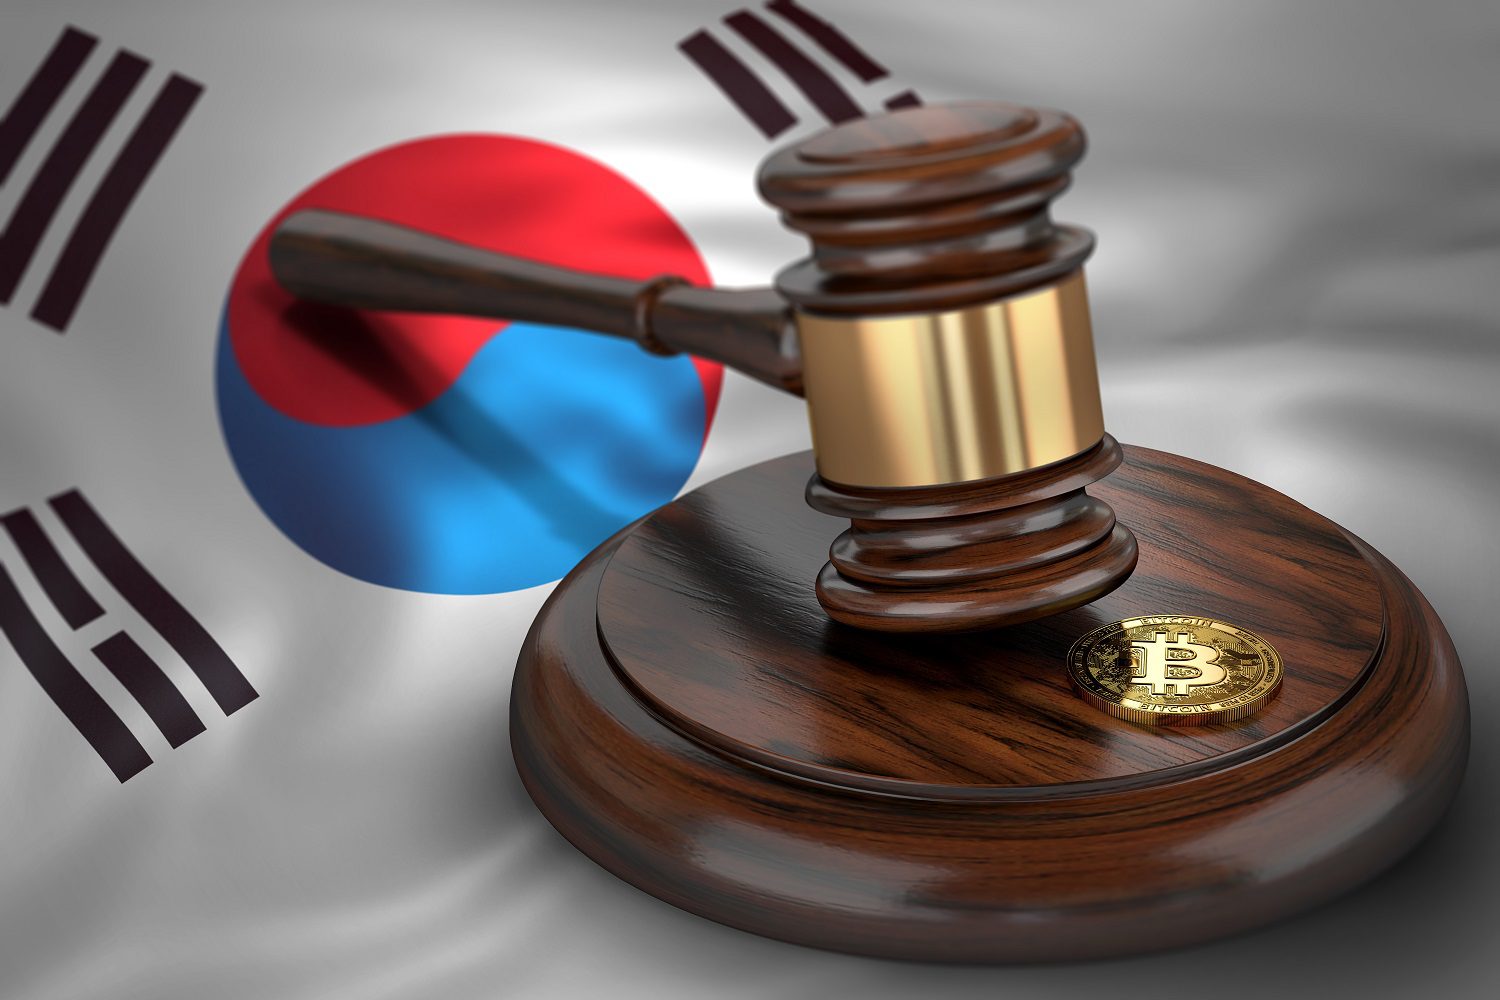 A token intended to represent Bitcoin and a judge’s gavel against the background of the flag of South Korea.